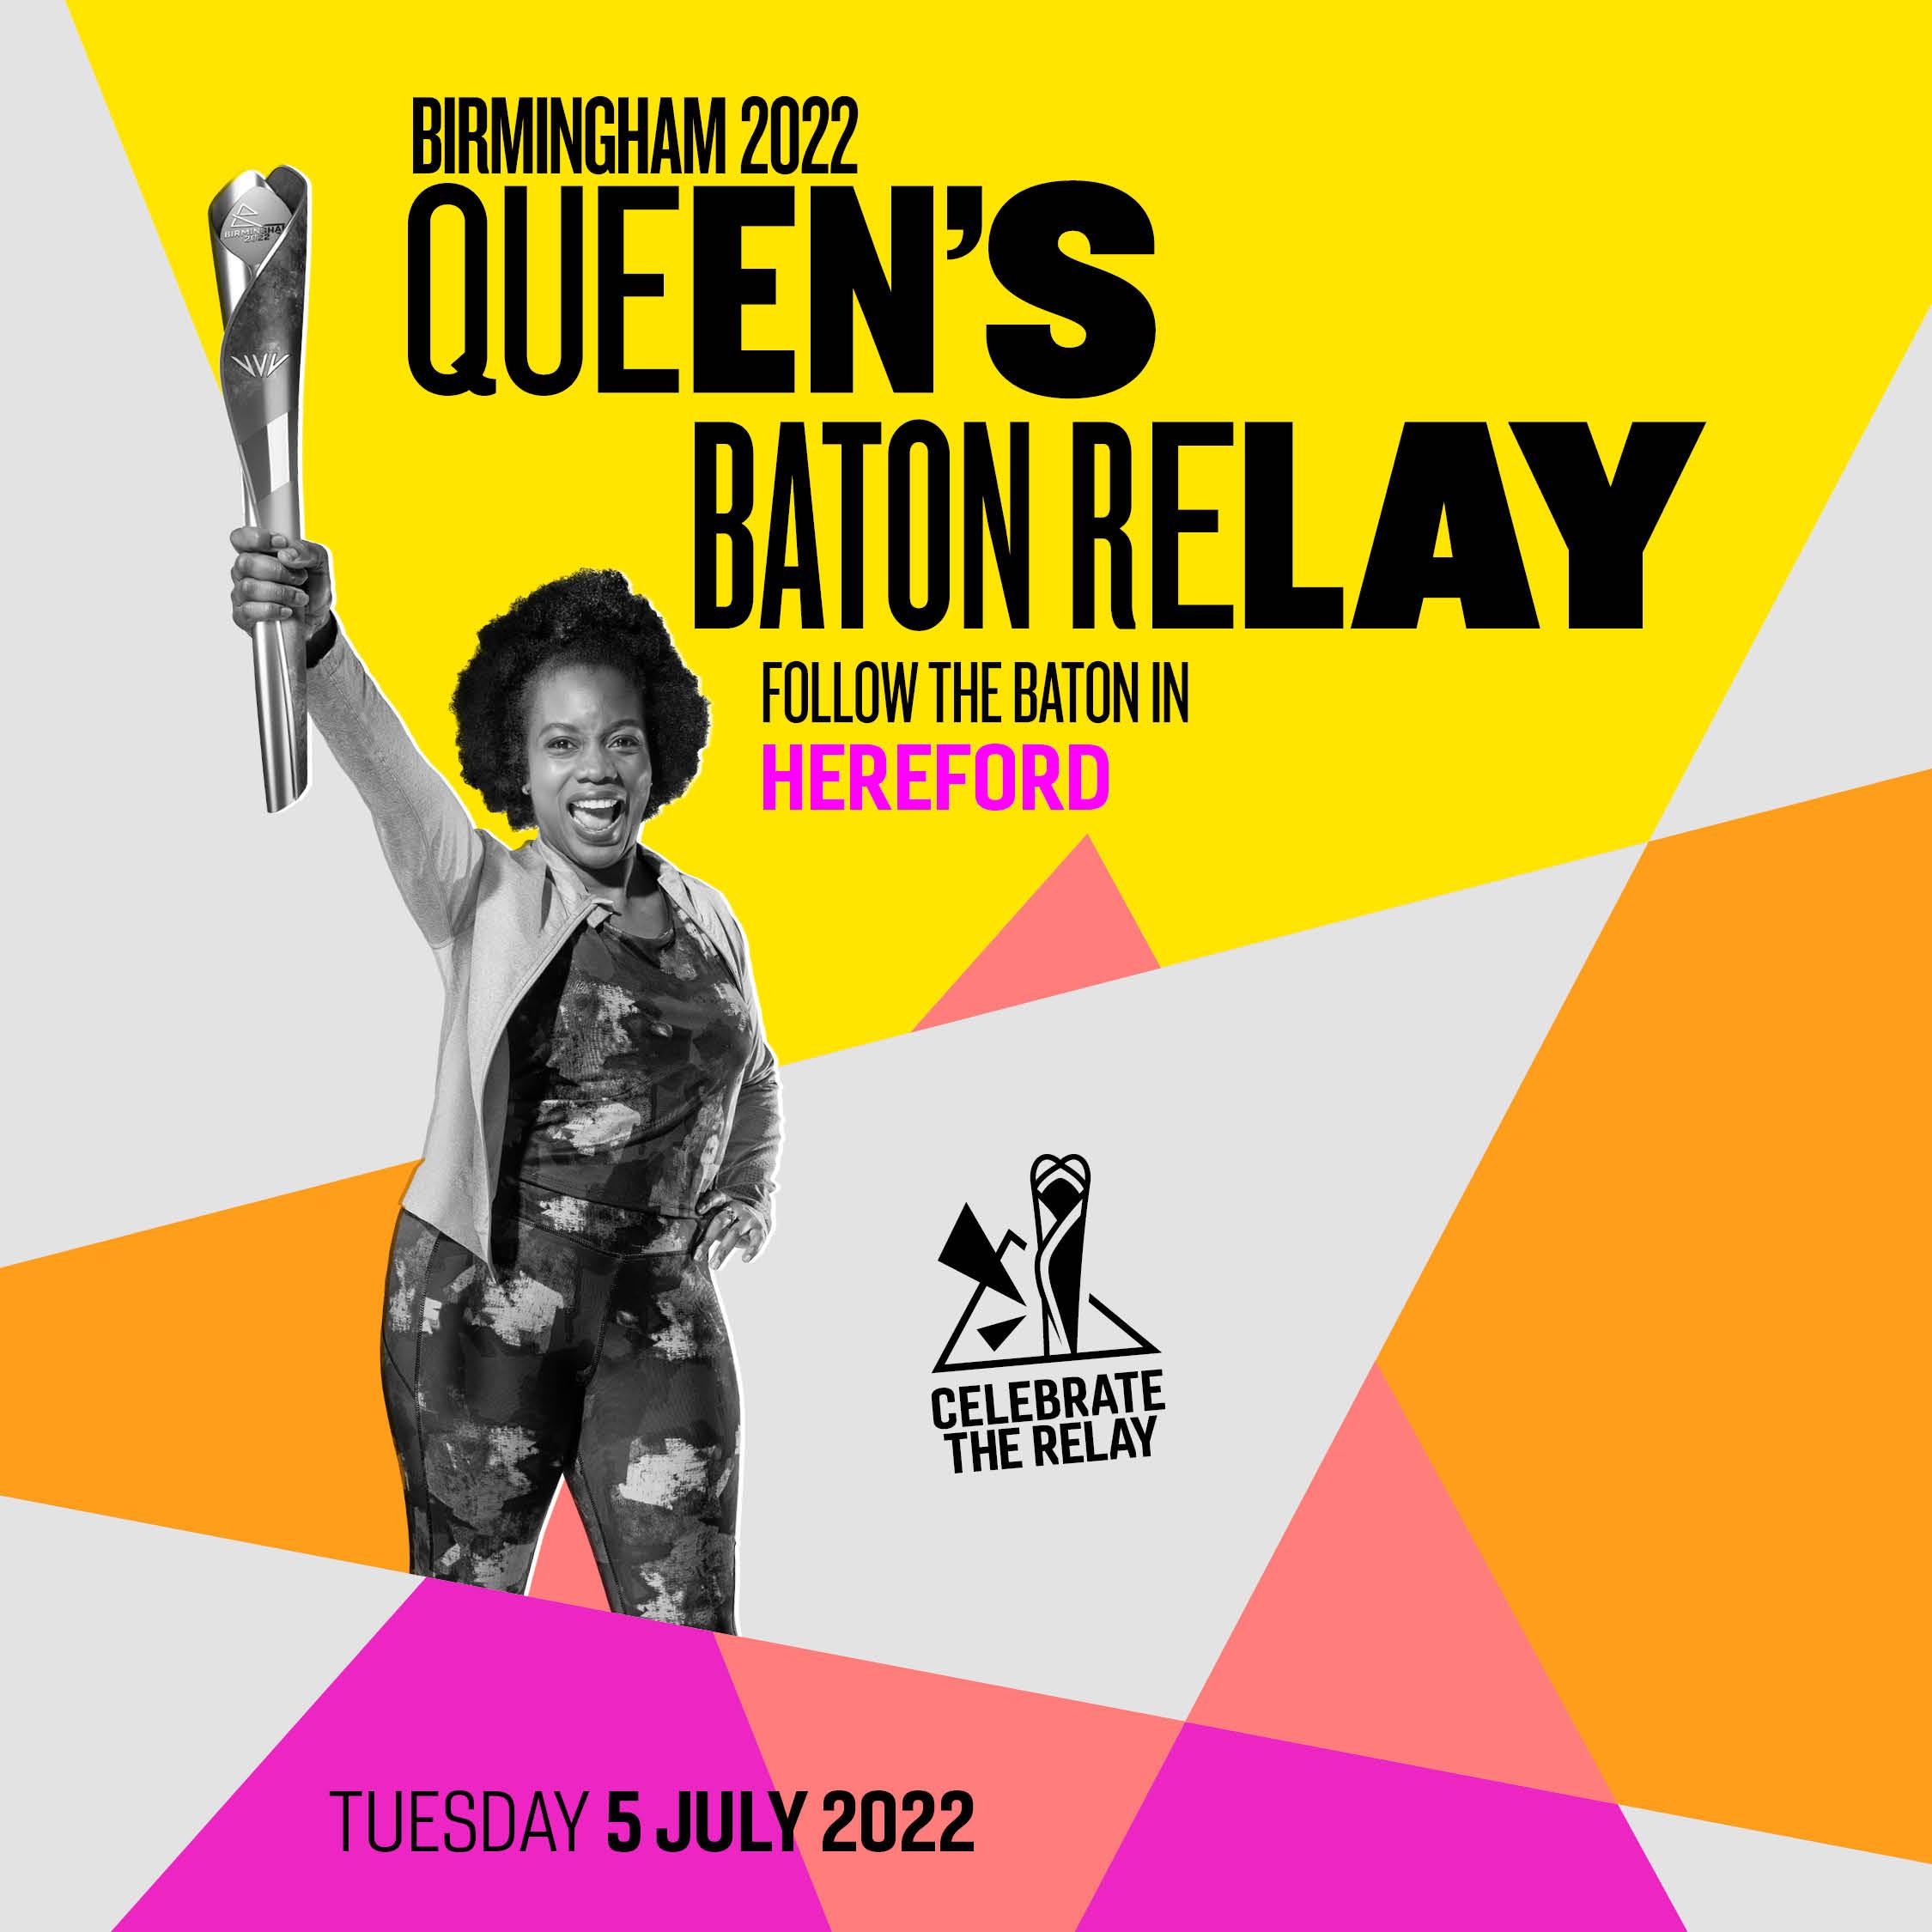 Baton bearer holding up baton and smiling - text Birmingham 2022 Queen's baton relay, follow the baton to Hereford Tues July 5 2022